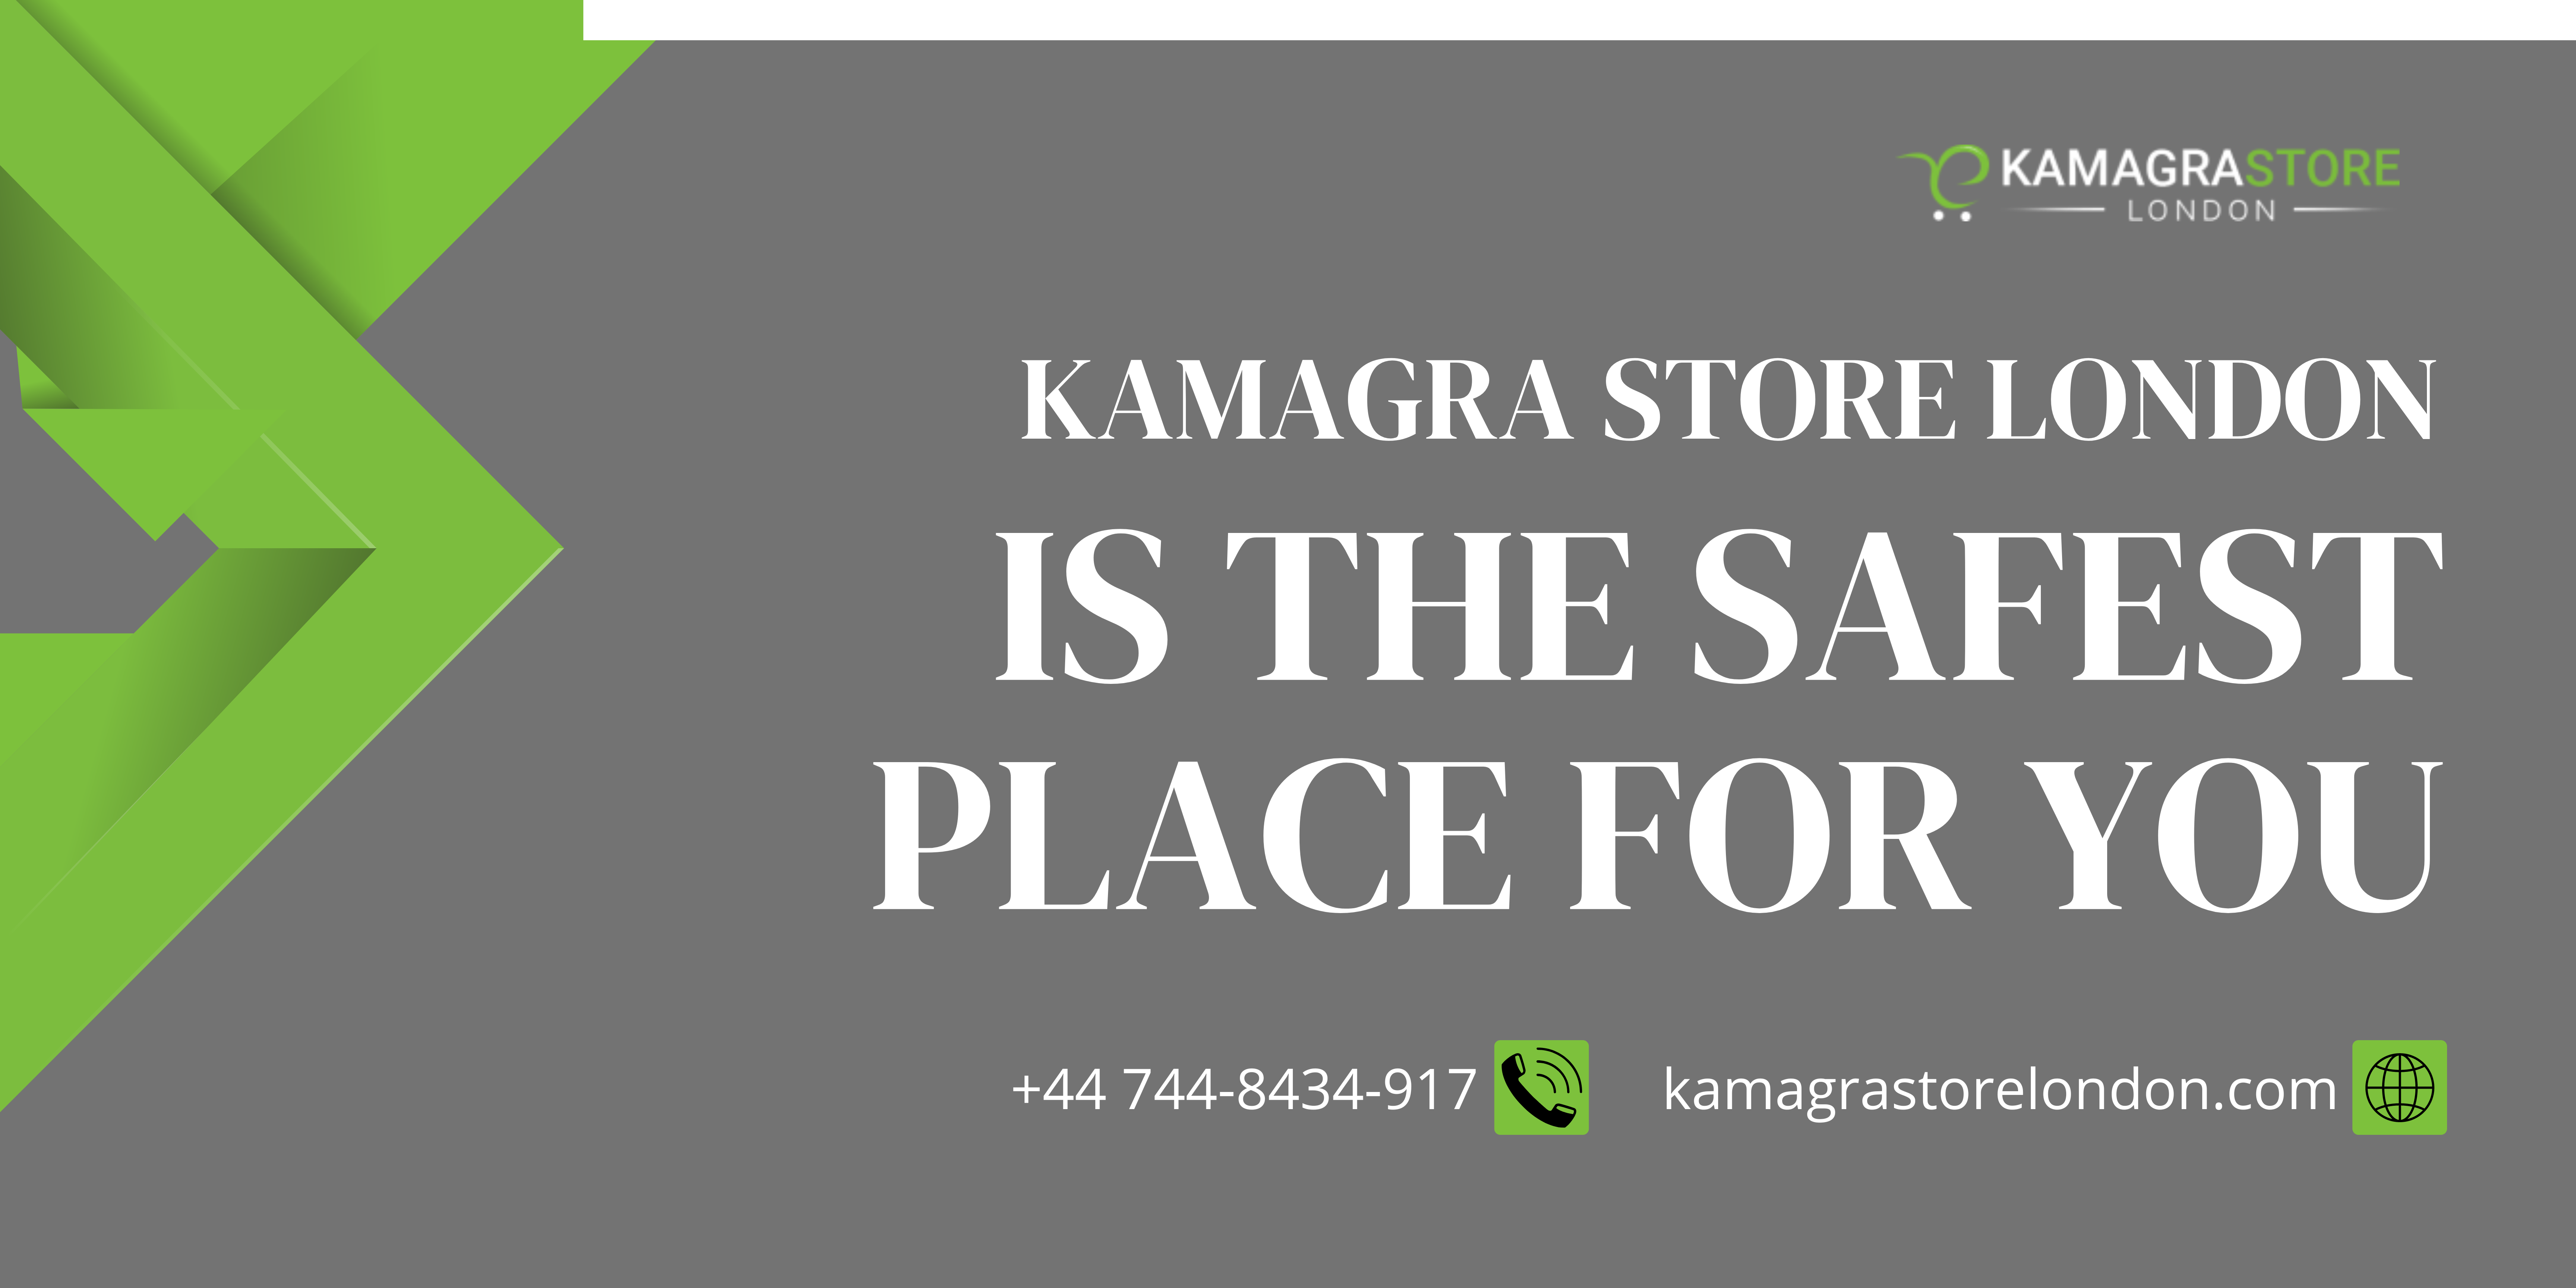 Kamagra Store London is the Safest Place for You